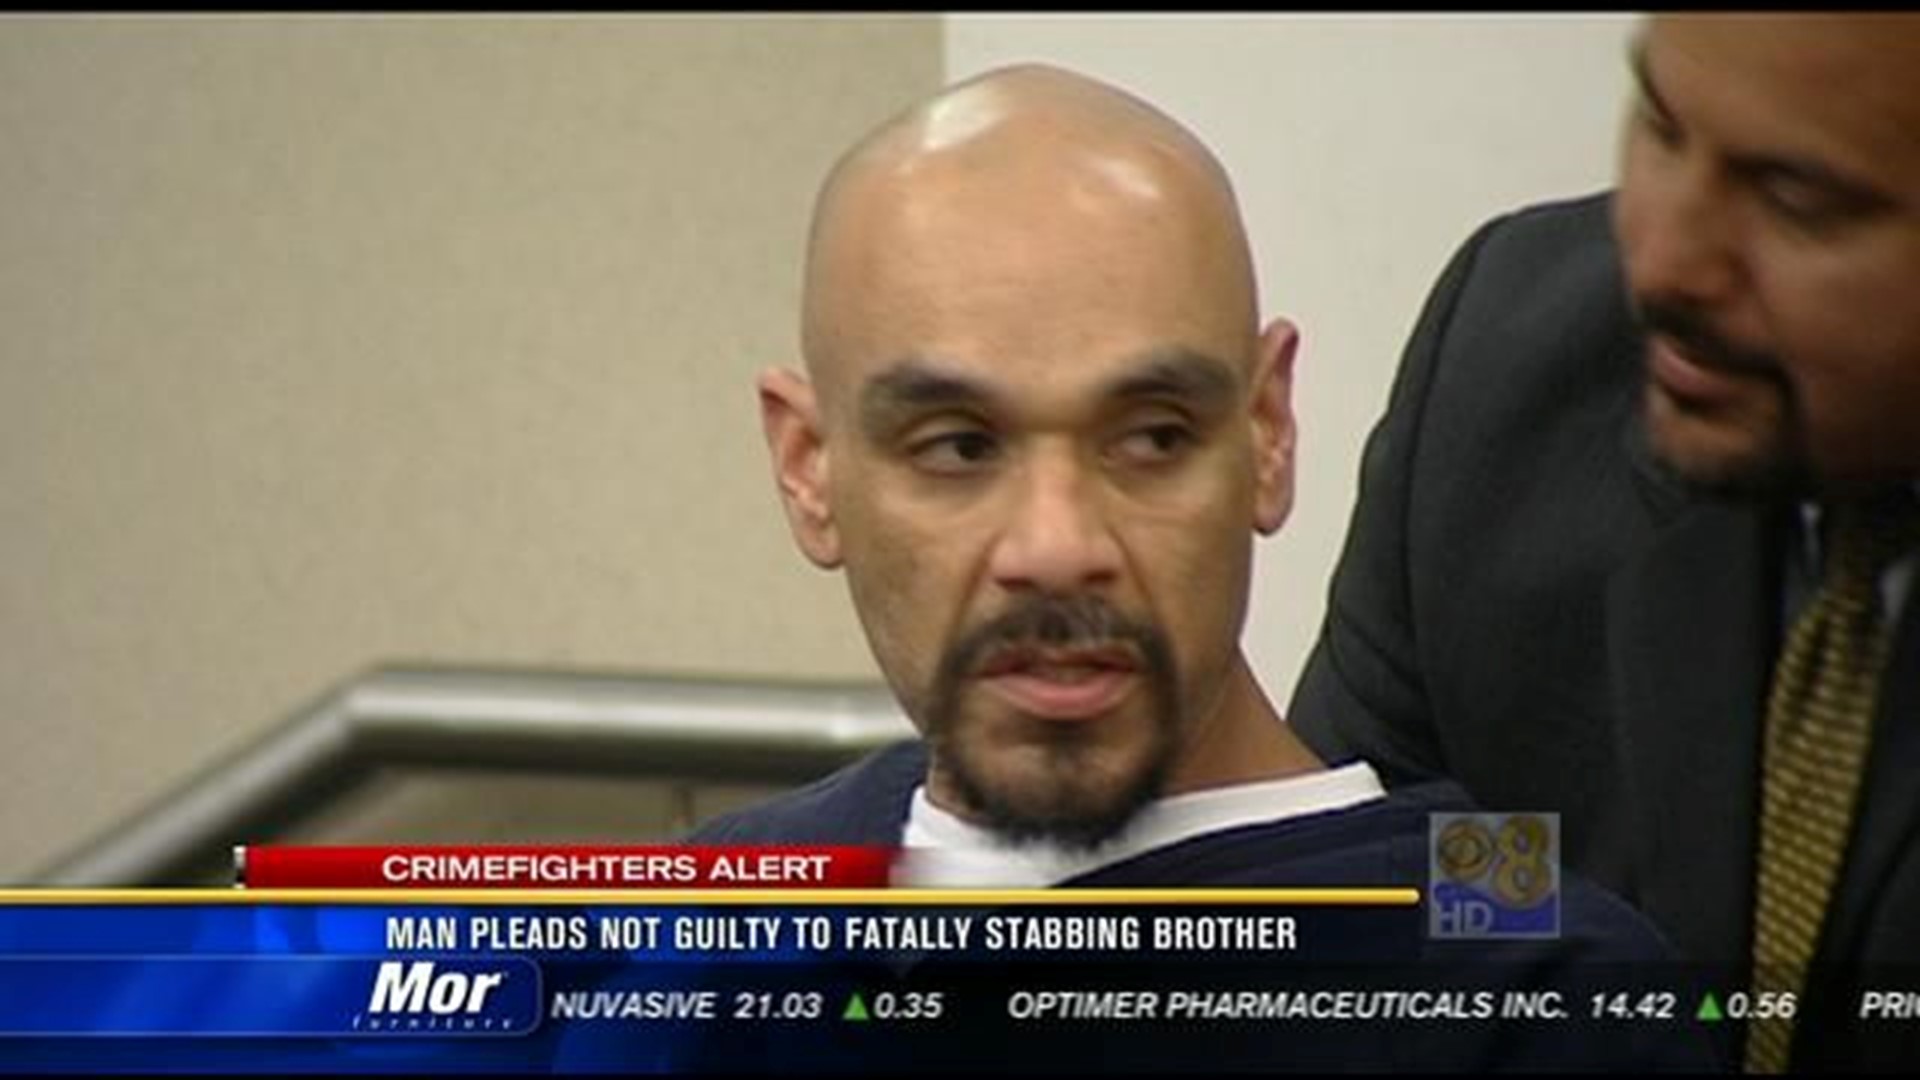 Man Accused Of Killing Brother Pleads Not Guilty 0302